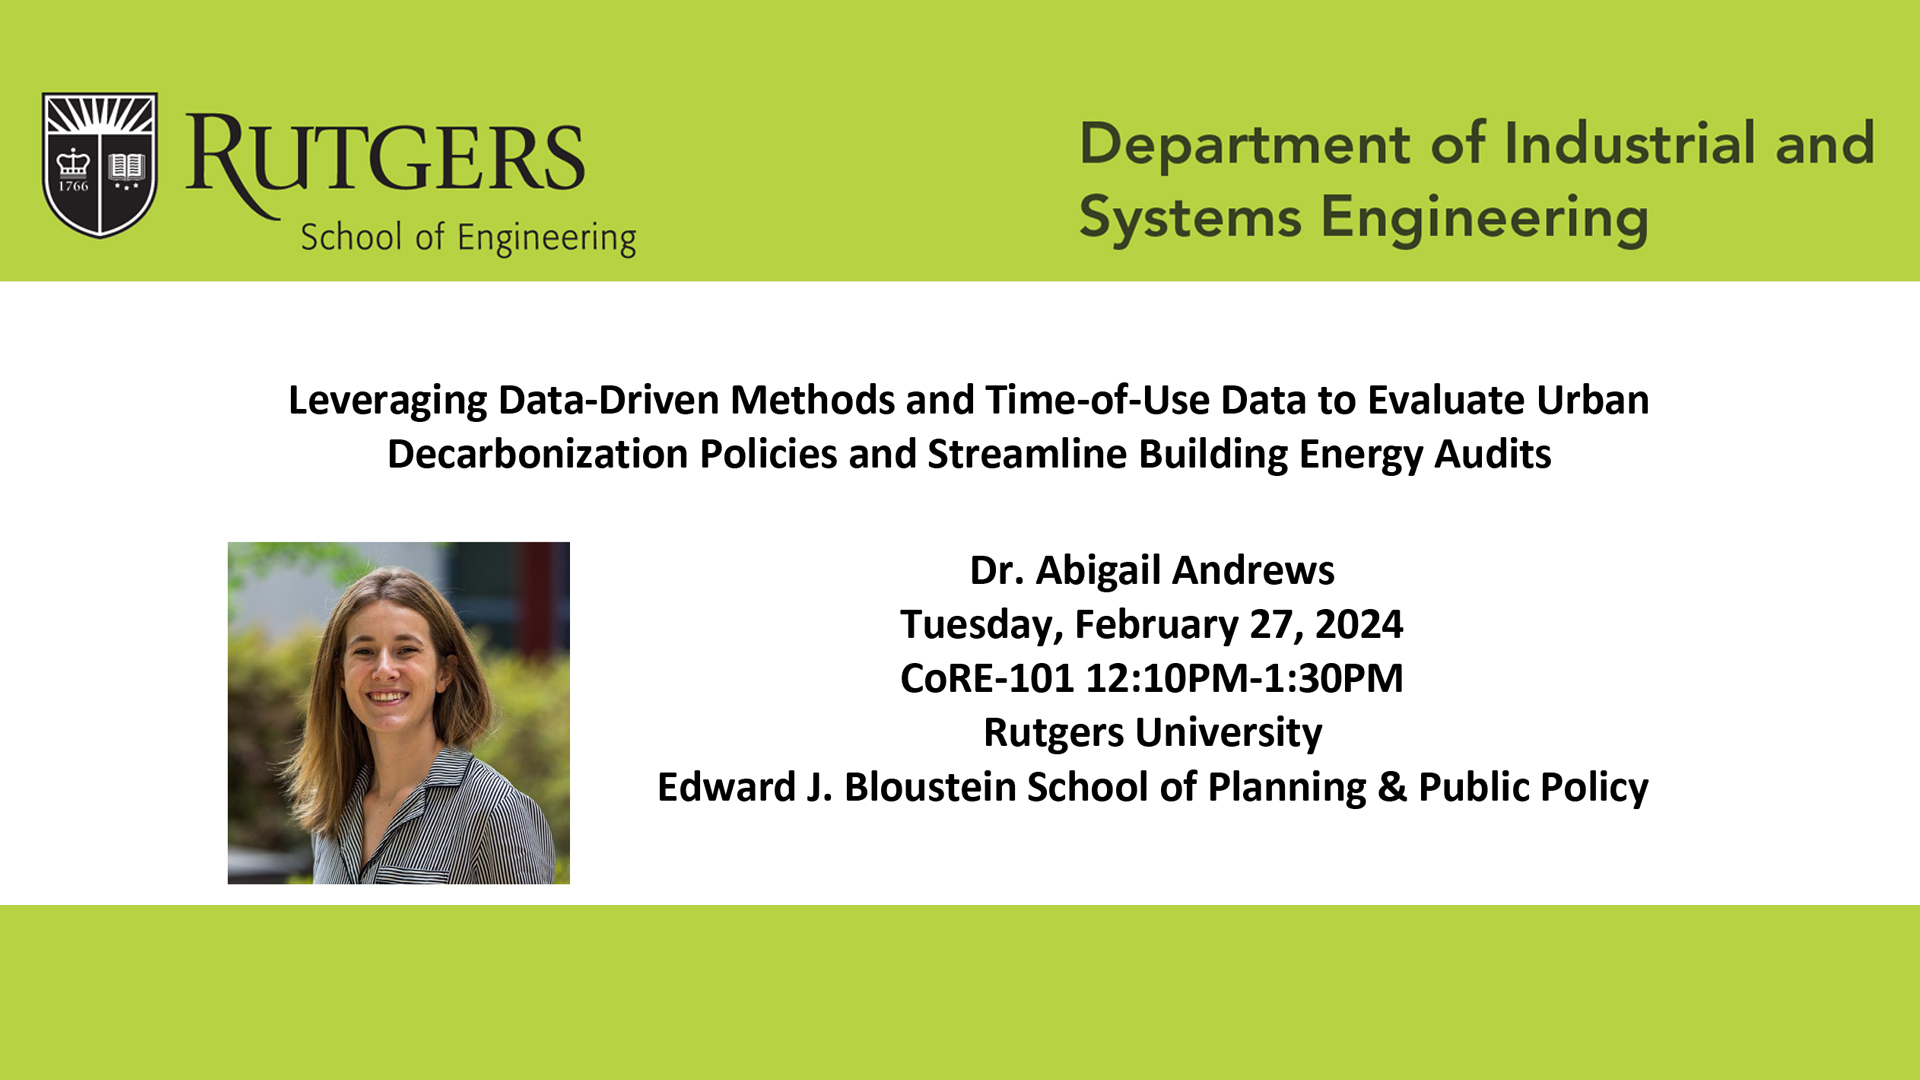 Dr. Abigail Andrews Leveraging Data-Driven Methods and Time-of-Use Data to Evaluate Urban Decarbonization Policies and Streamline Building Energy Audits